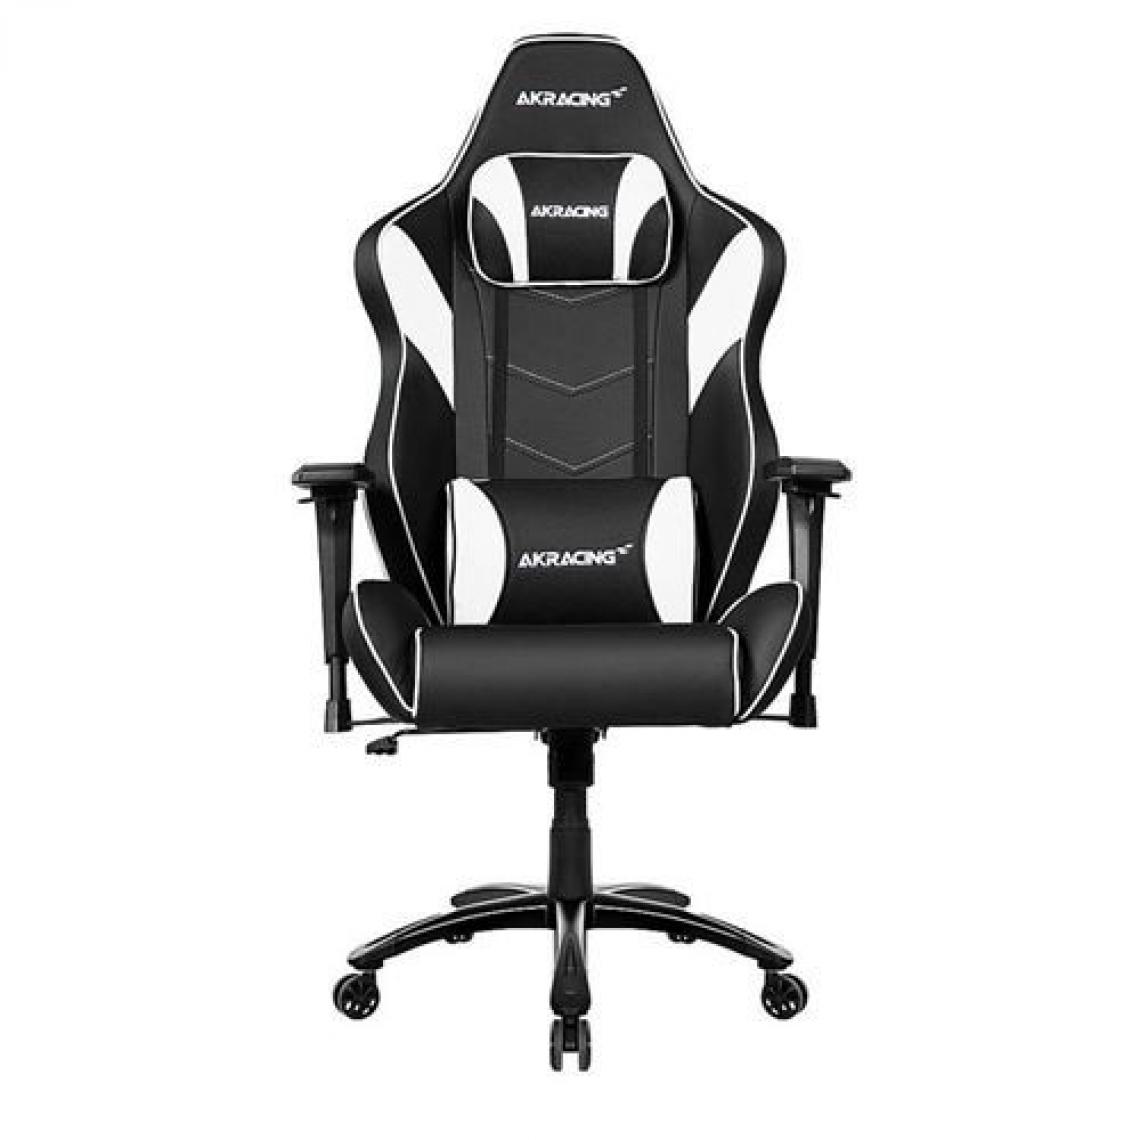 Akracing - Chaise Gaming AkRacing Série Core LX Plus Noir et blanc - Chaise gamer